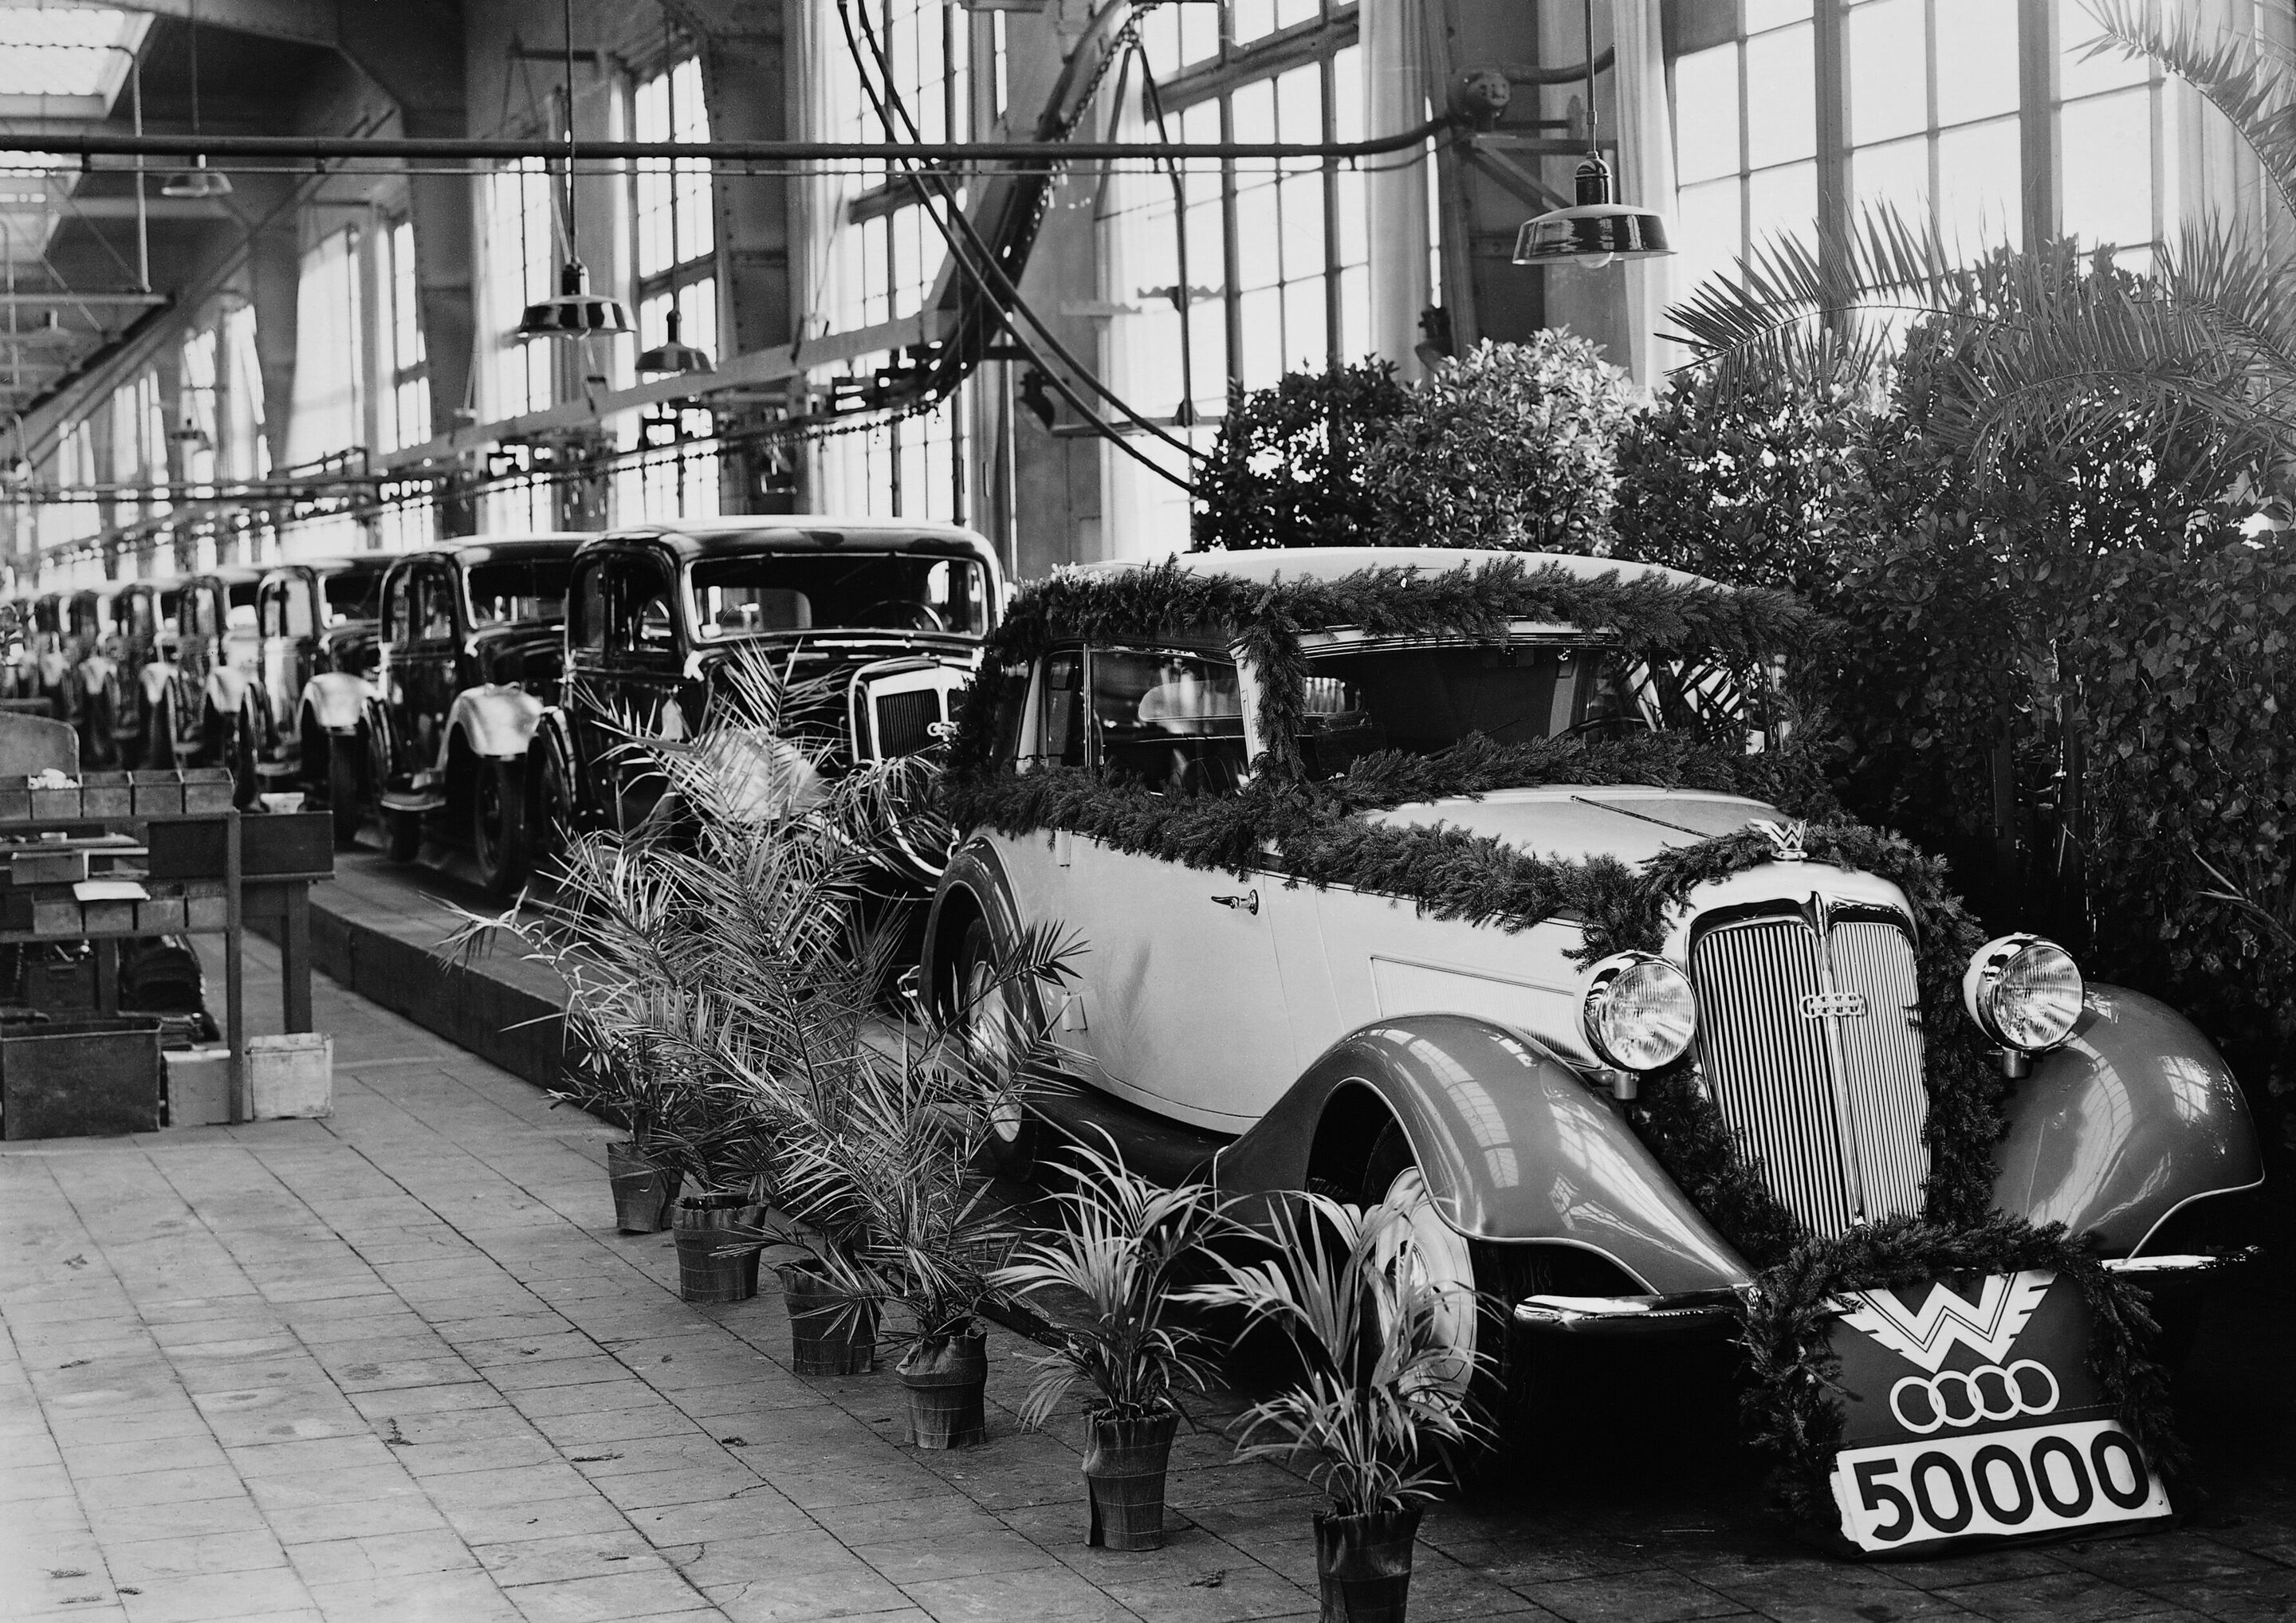 Celebration at the Wanderer car plant in Chemnitz-Siegmar to mark the 50.000th Wanderer, 1936; Wanderer W50, convertible, six-cylinder inline engine, 2.3 litres, 50 hp.